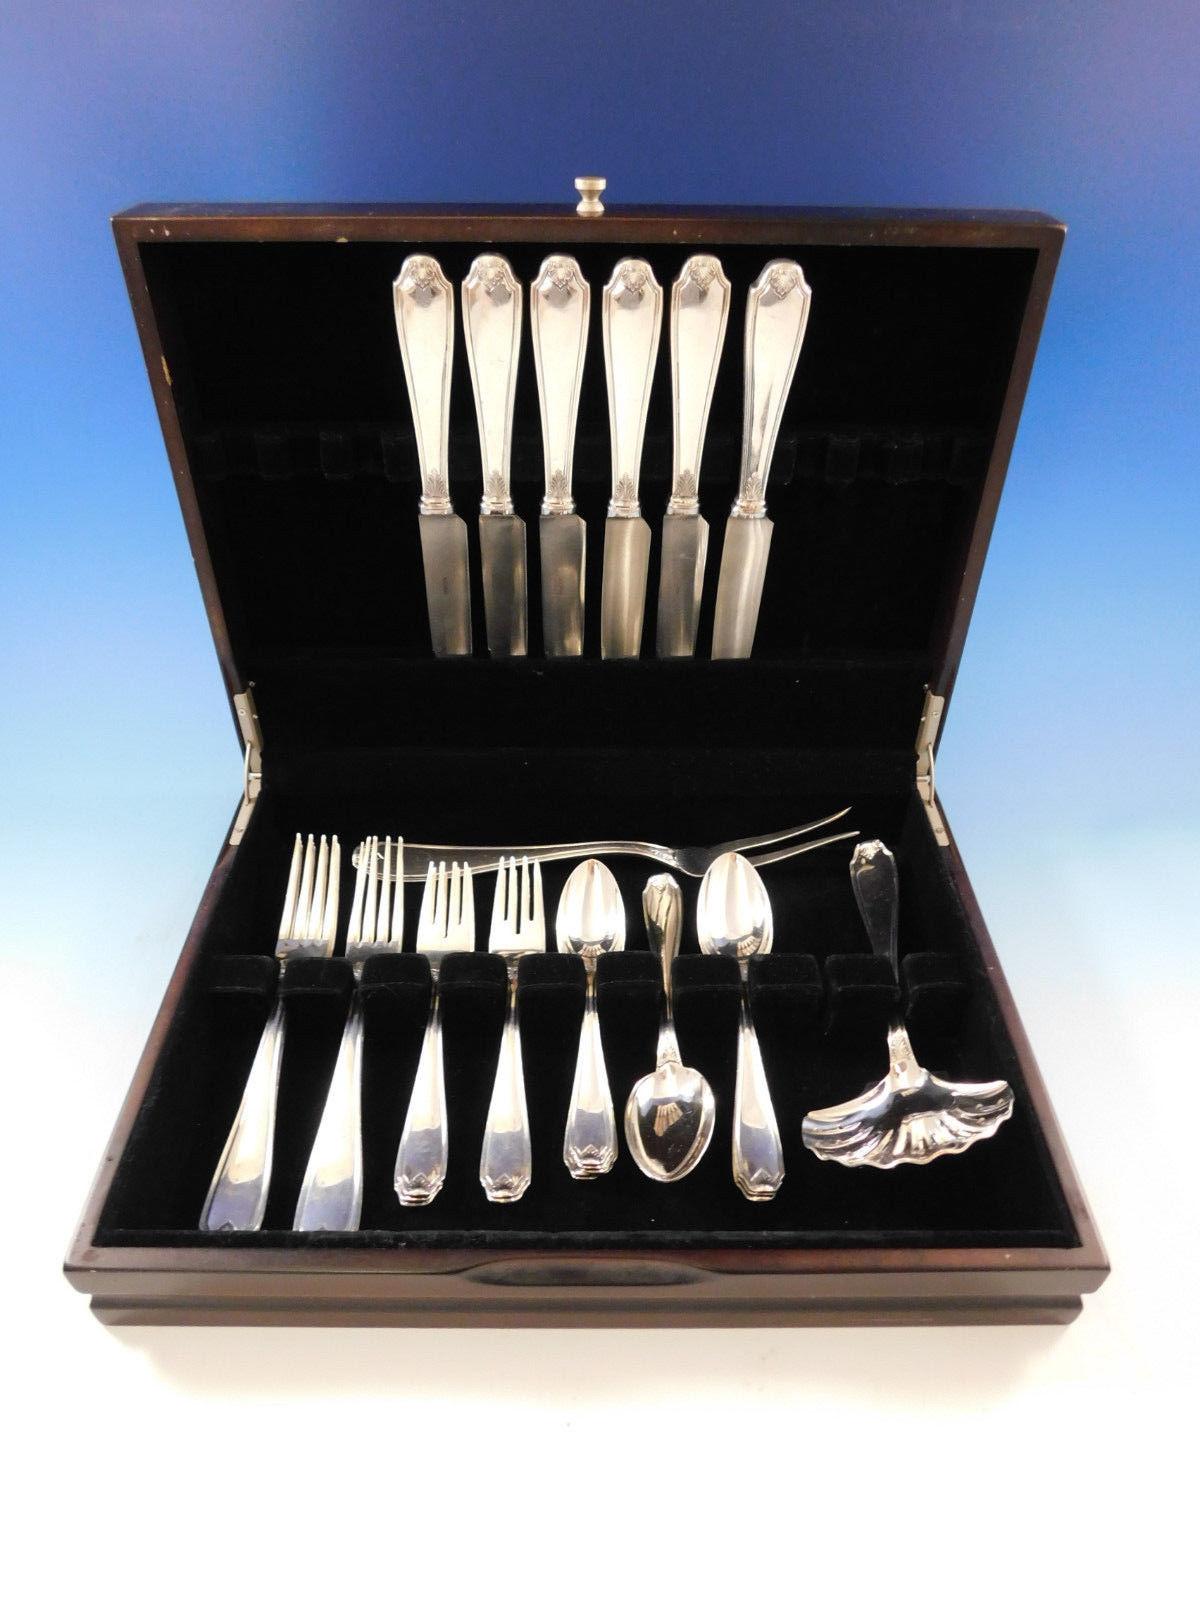 Exquisite dinner size piedmont by Buccellati Italy sterling silver flatware set - 32 pieces. Great starter set! This set includes:

Six dinner size knives, 9 3/4